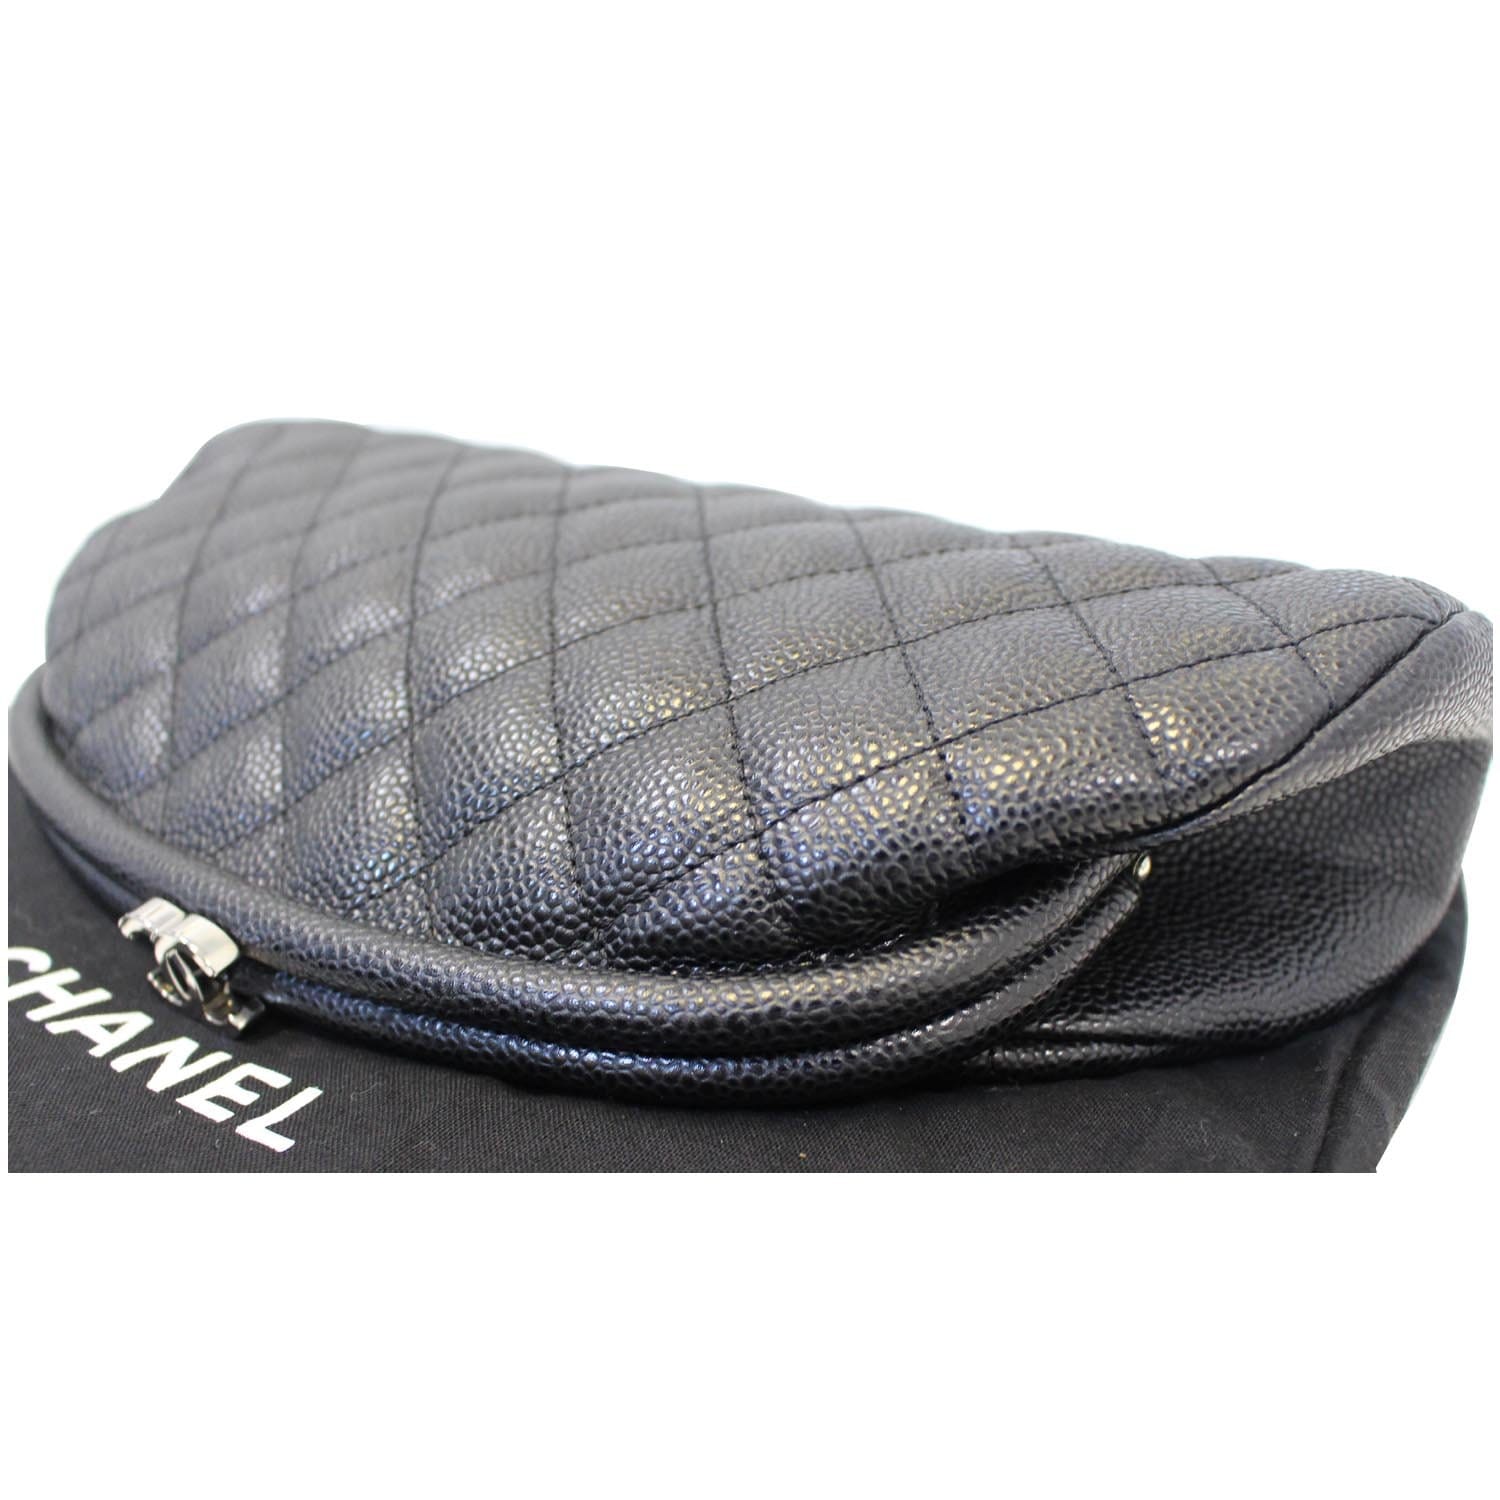 Chanel Grey Quilted Caviar Timeless CC Large Frame Clutch Bag